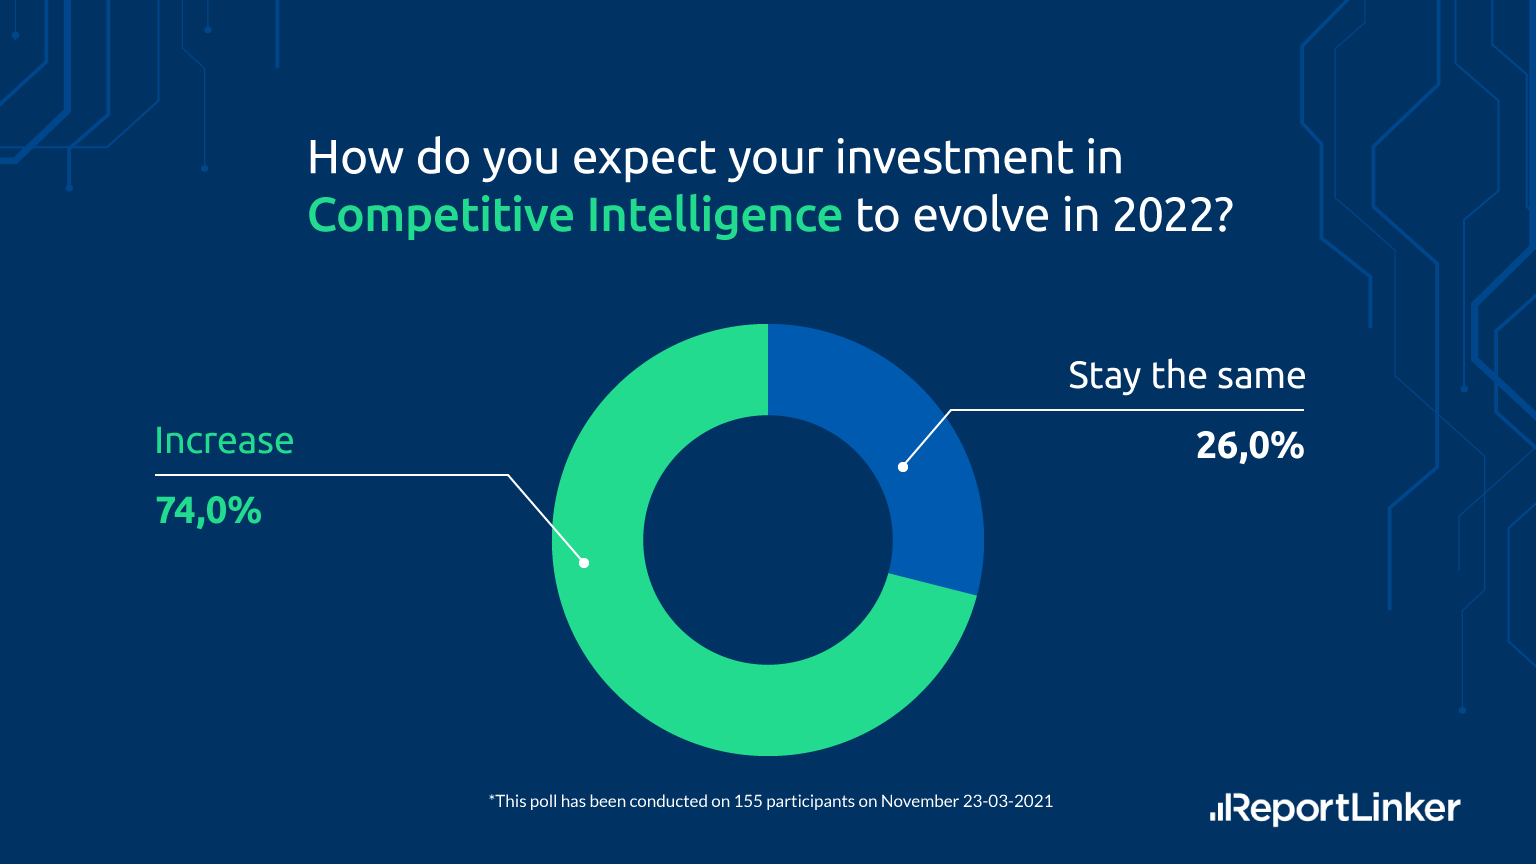 investments-competitive-intelligence-2022